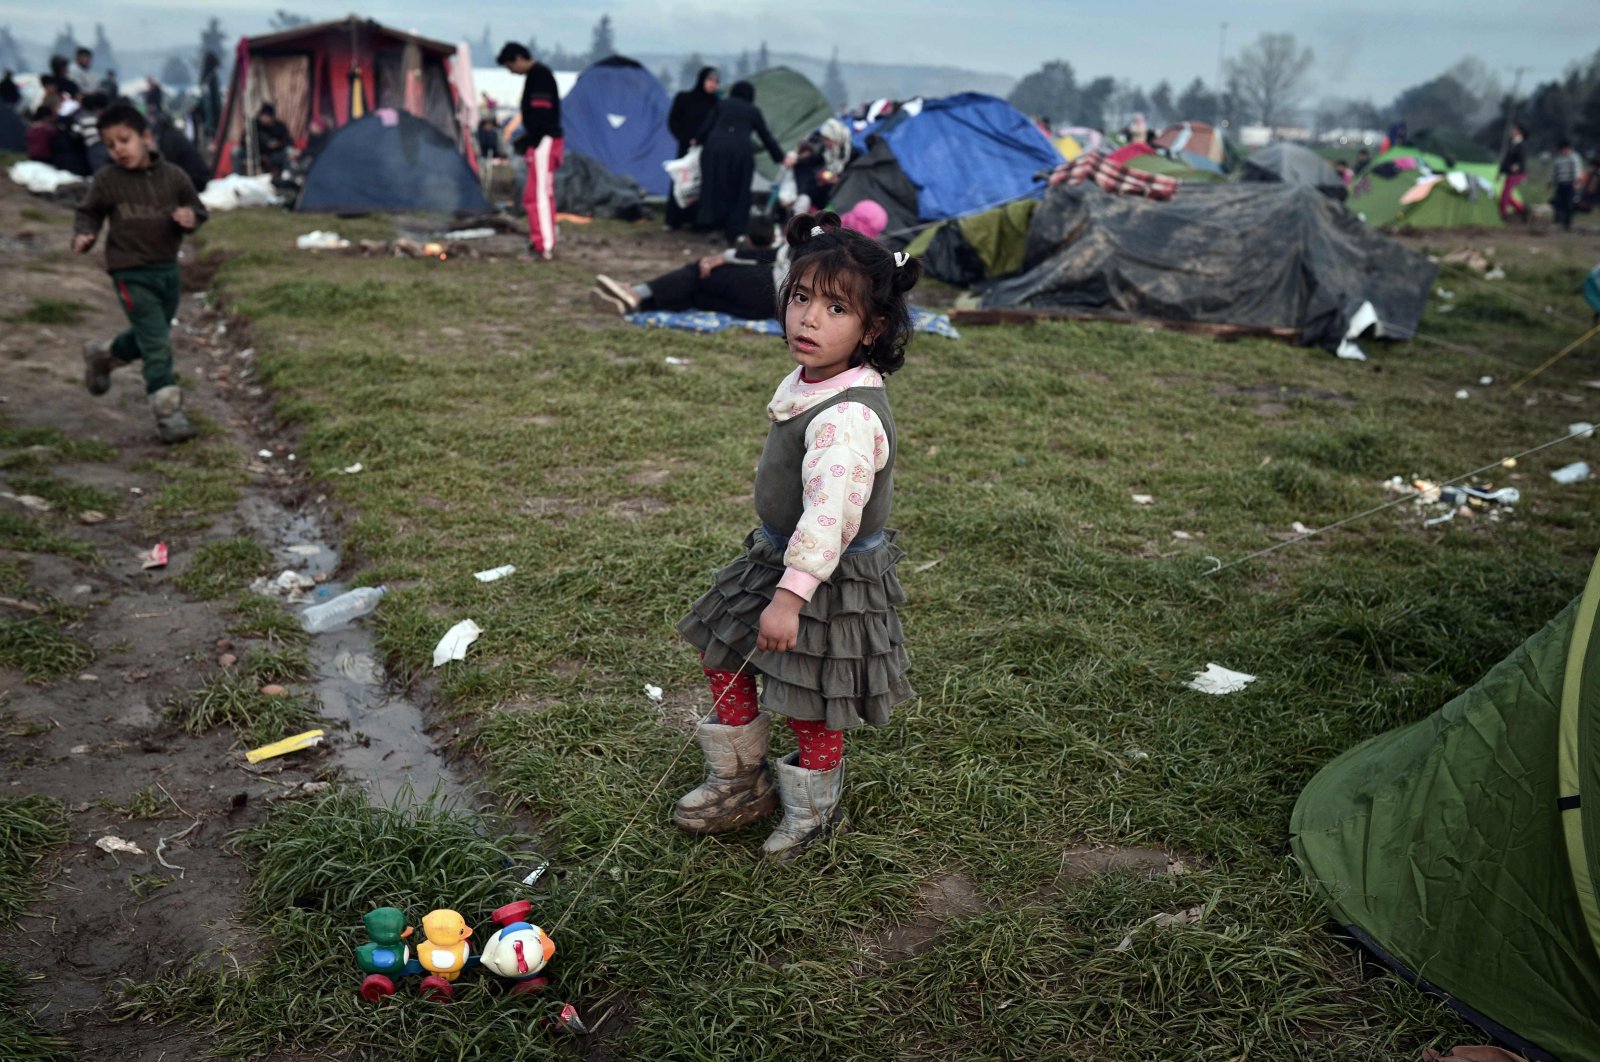 A child plays at a makeshift camp at the Greek-Macedonian borders, where the "Balkan route" once carried thousands of refugees to Europe, near the village of Idomeni, Greece, March 8, 2016. (AFP)